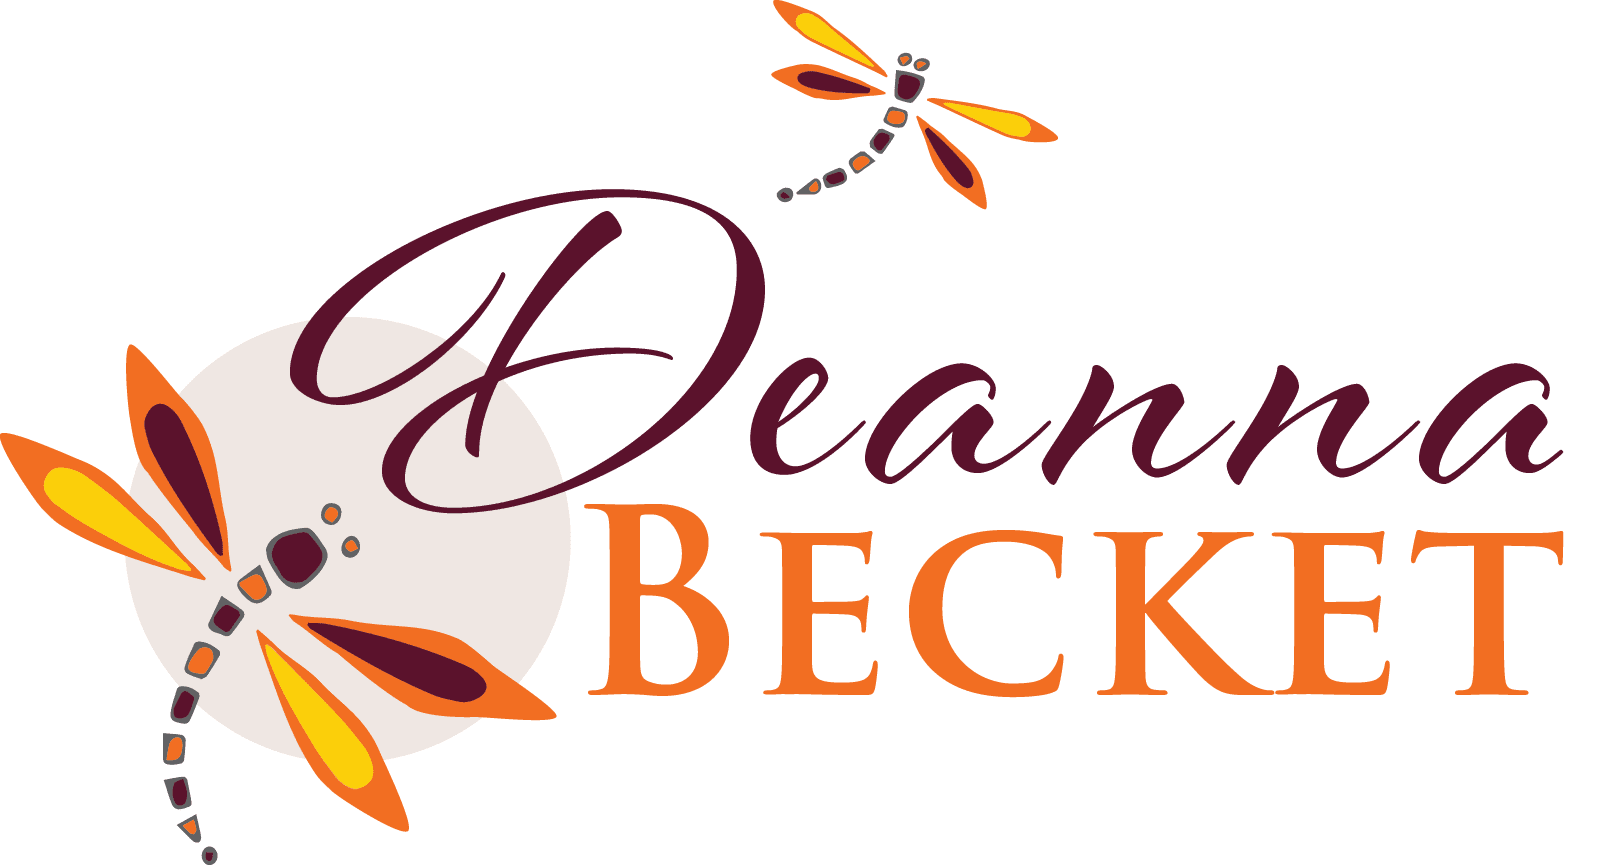 Deanna Becket | Professional Speaker, Author, and Coach